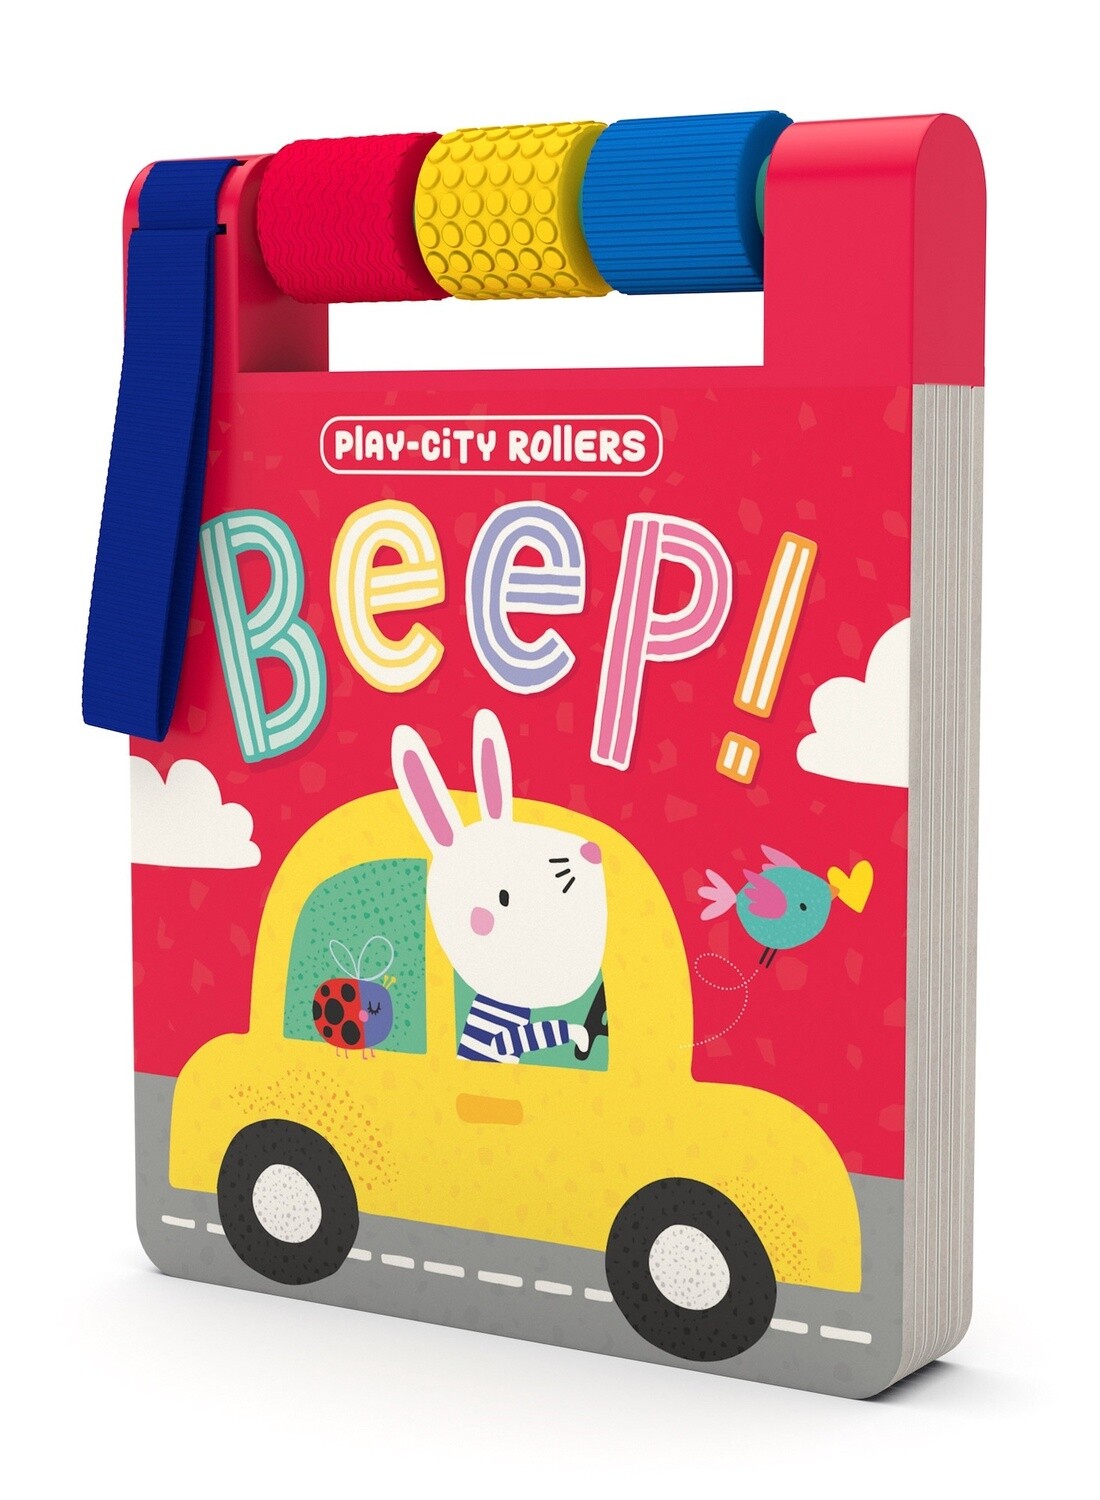 Beep! (Play-City Rollers) by Christie Hainsby